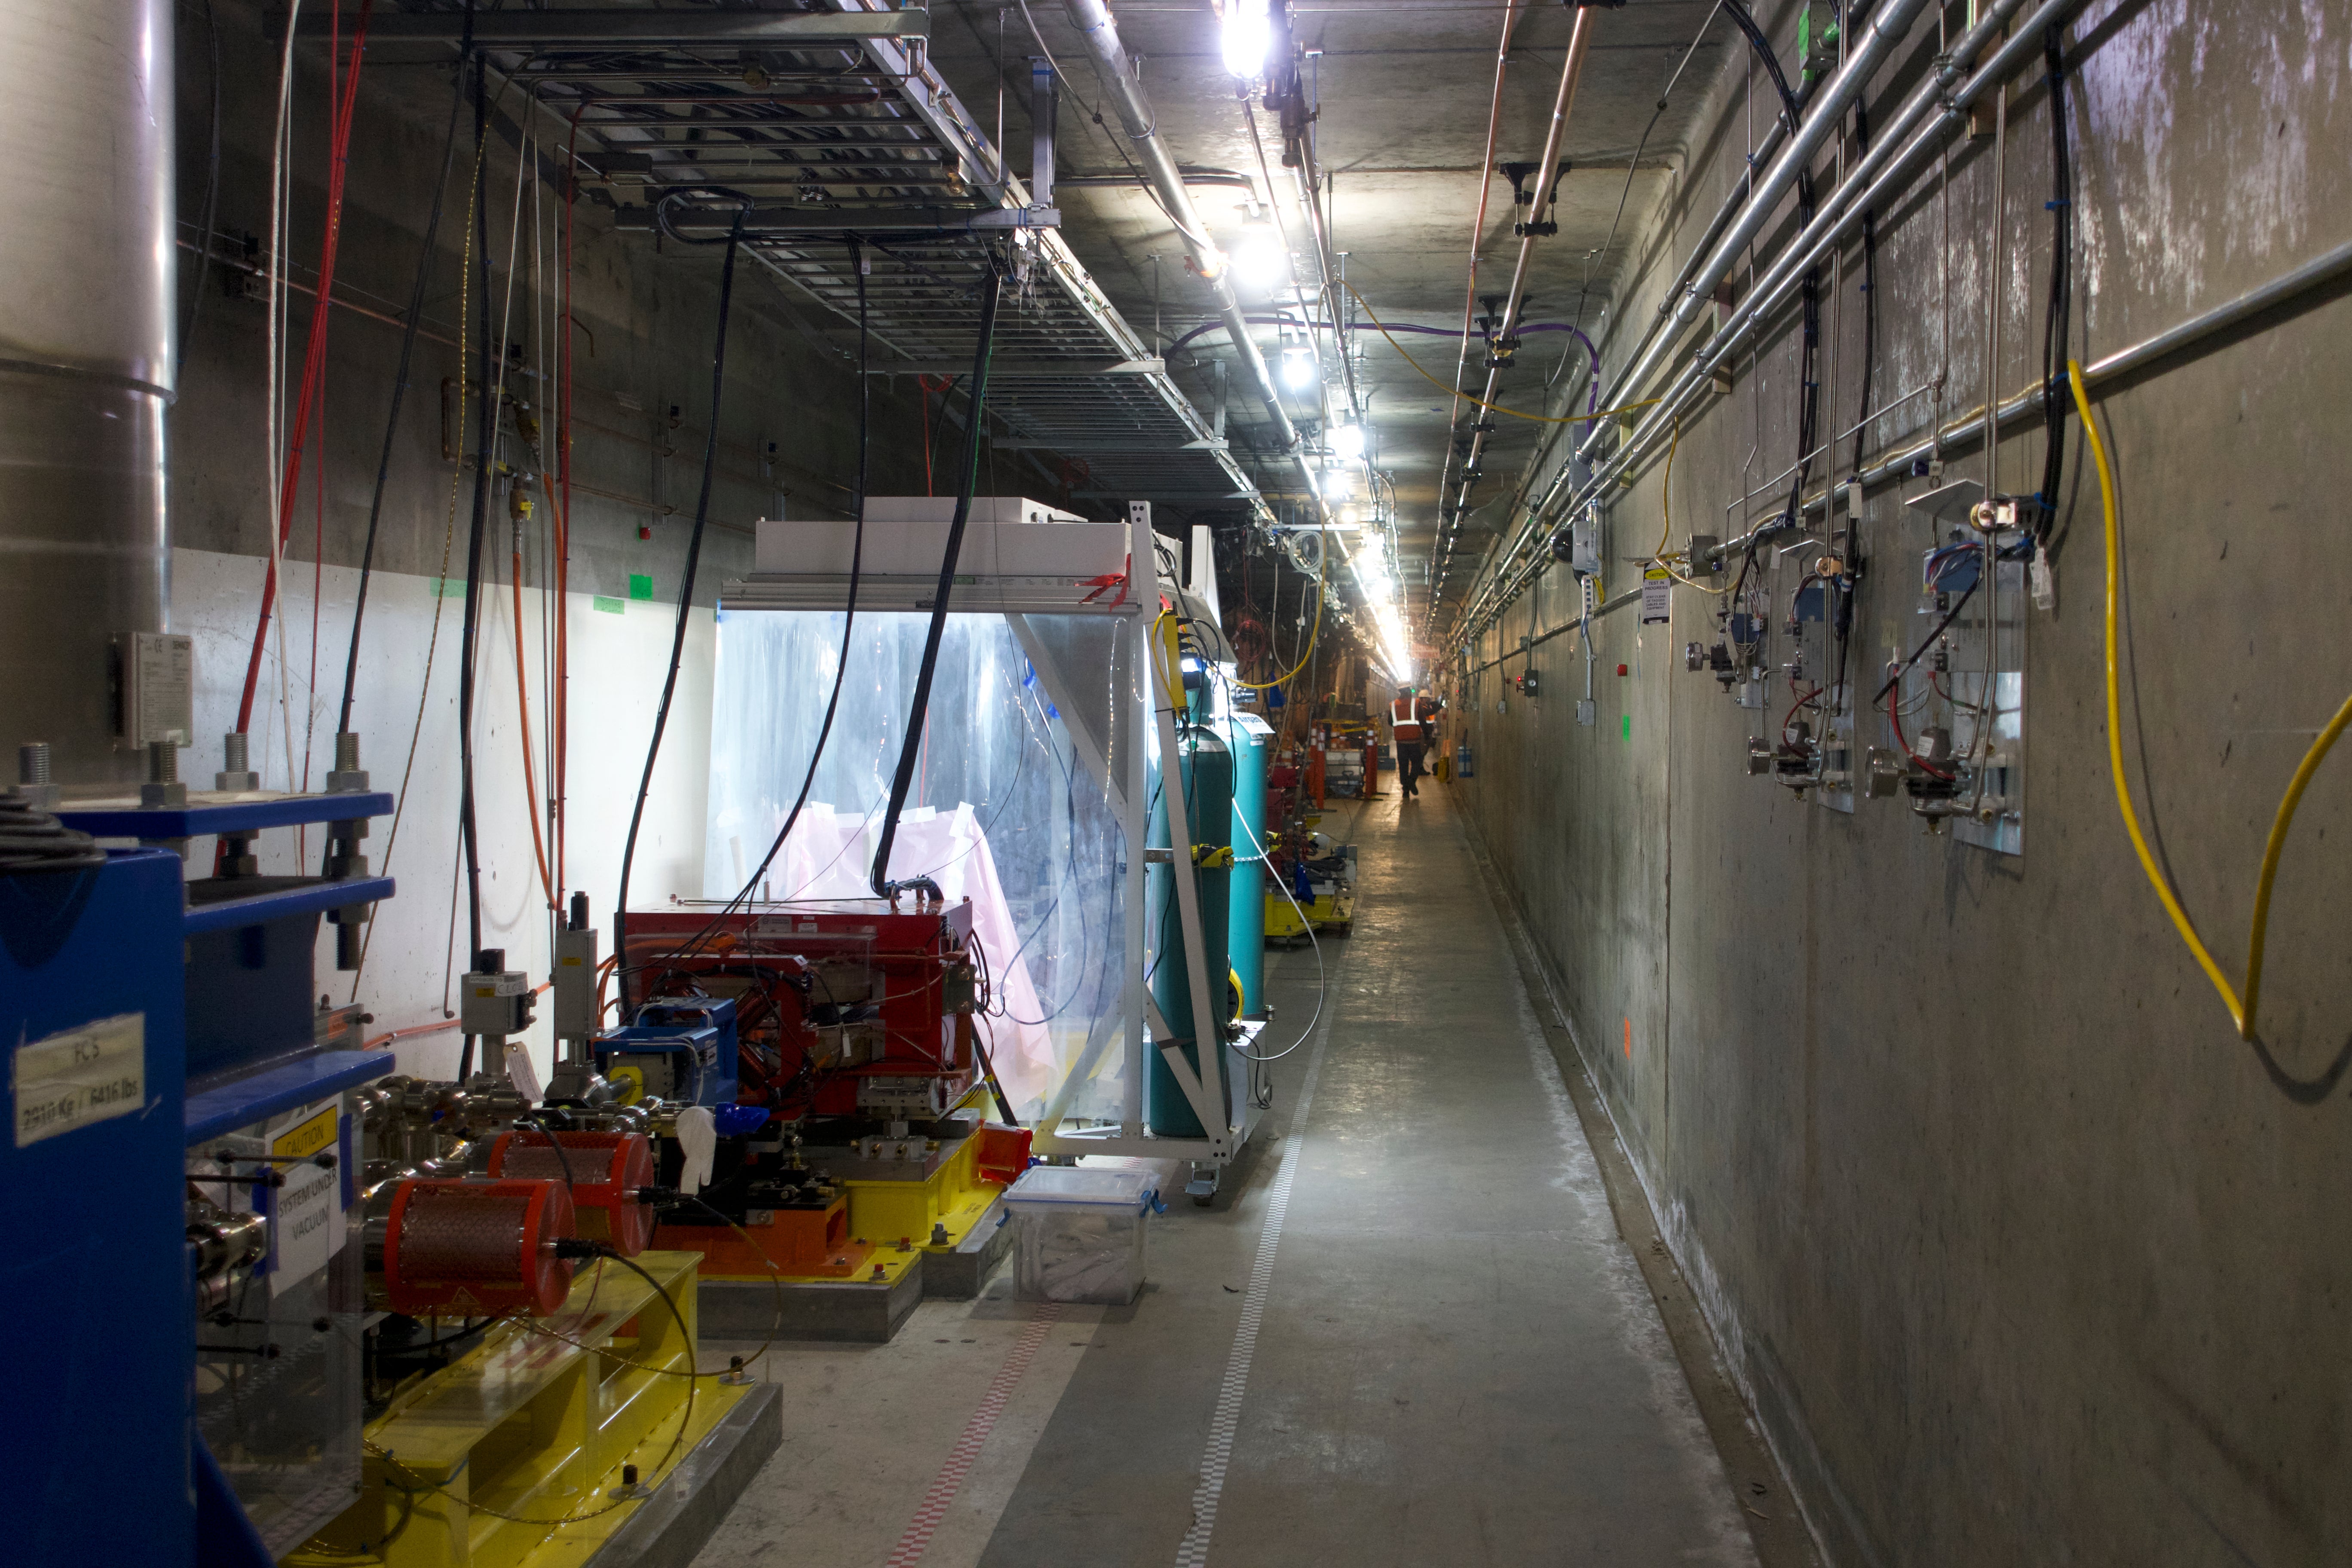 Inside the 3 km tunnel that contains LCLS and LCLS-II. (Photo: Isaac Schultz)